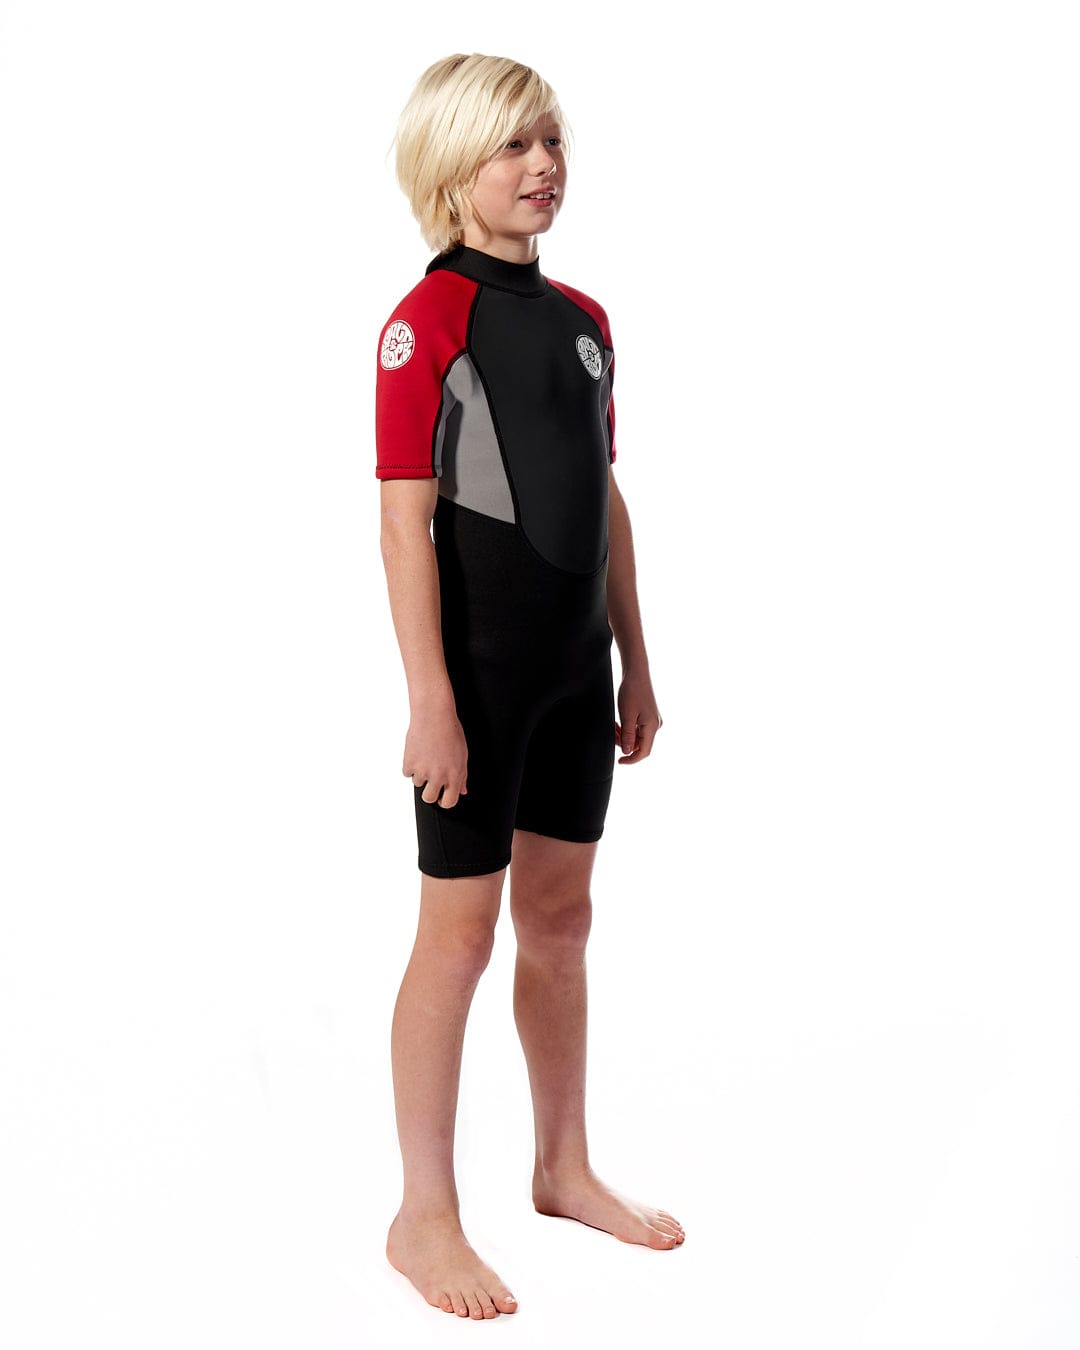 A young boy in a Saltrock wetsuit stands in front of a white background, ready for some beach days.